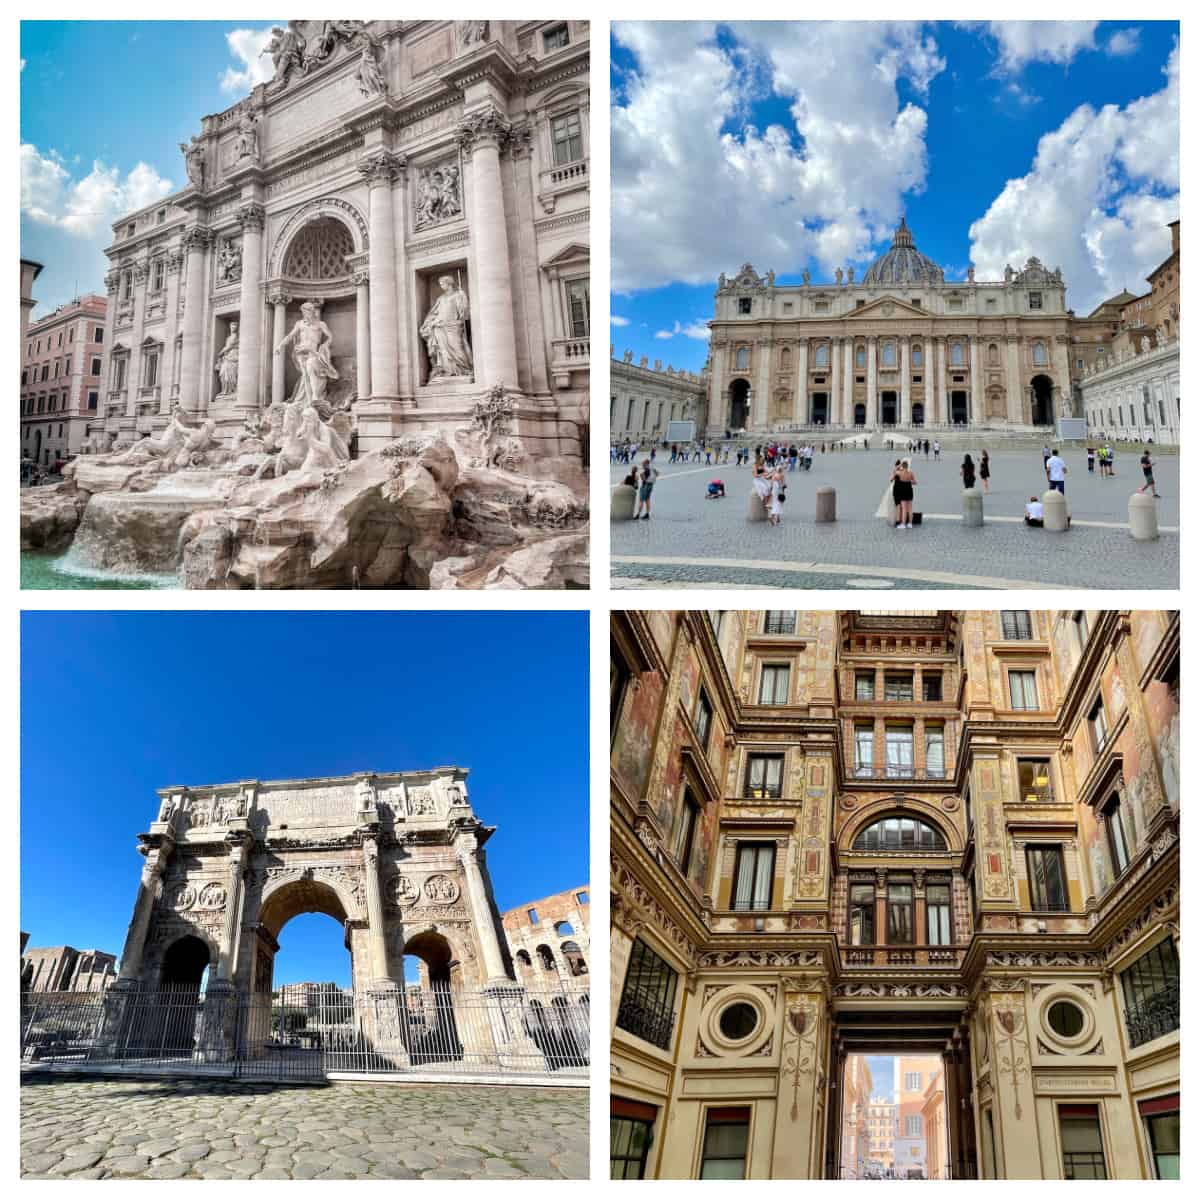 Collage of sites in Rome Italy.